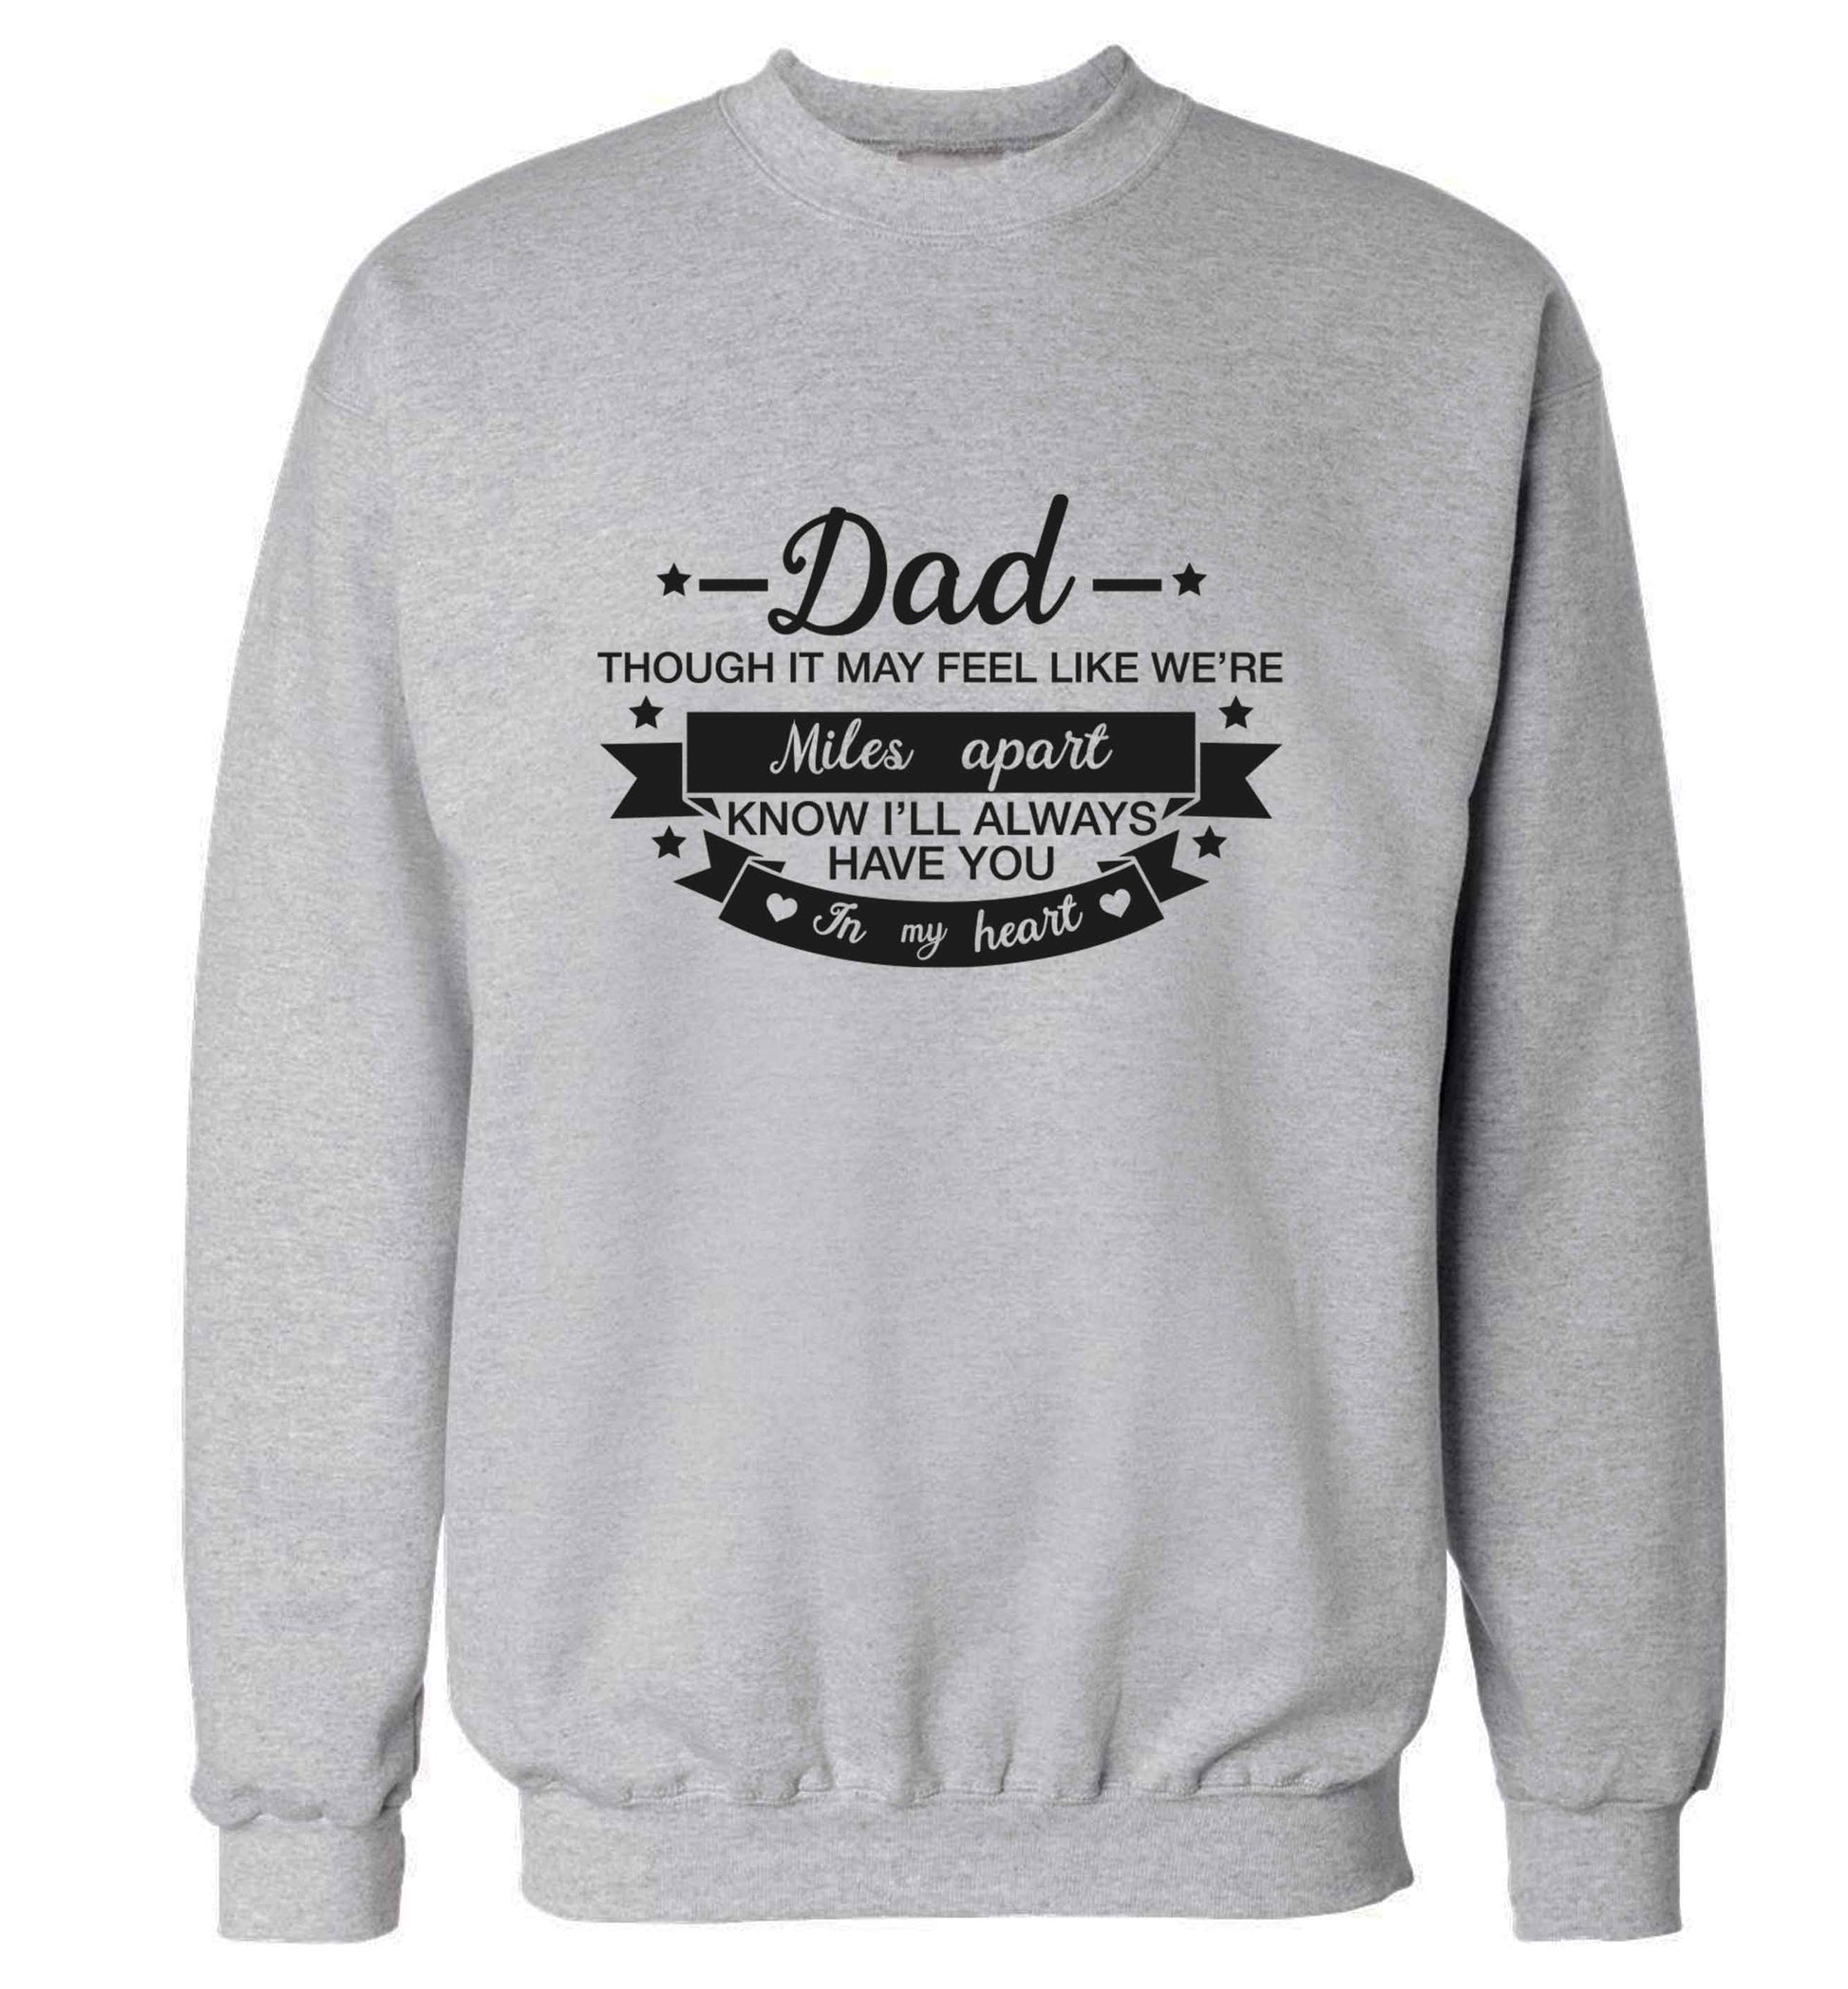 Dad though it may feel like we're miles apart know I'll always have you in my heart adult's unisex grey sweater 2XL